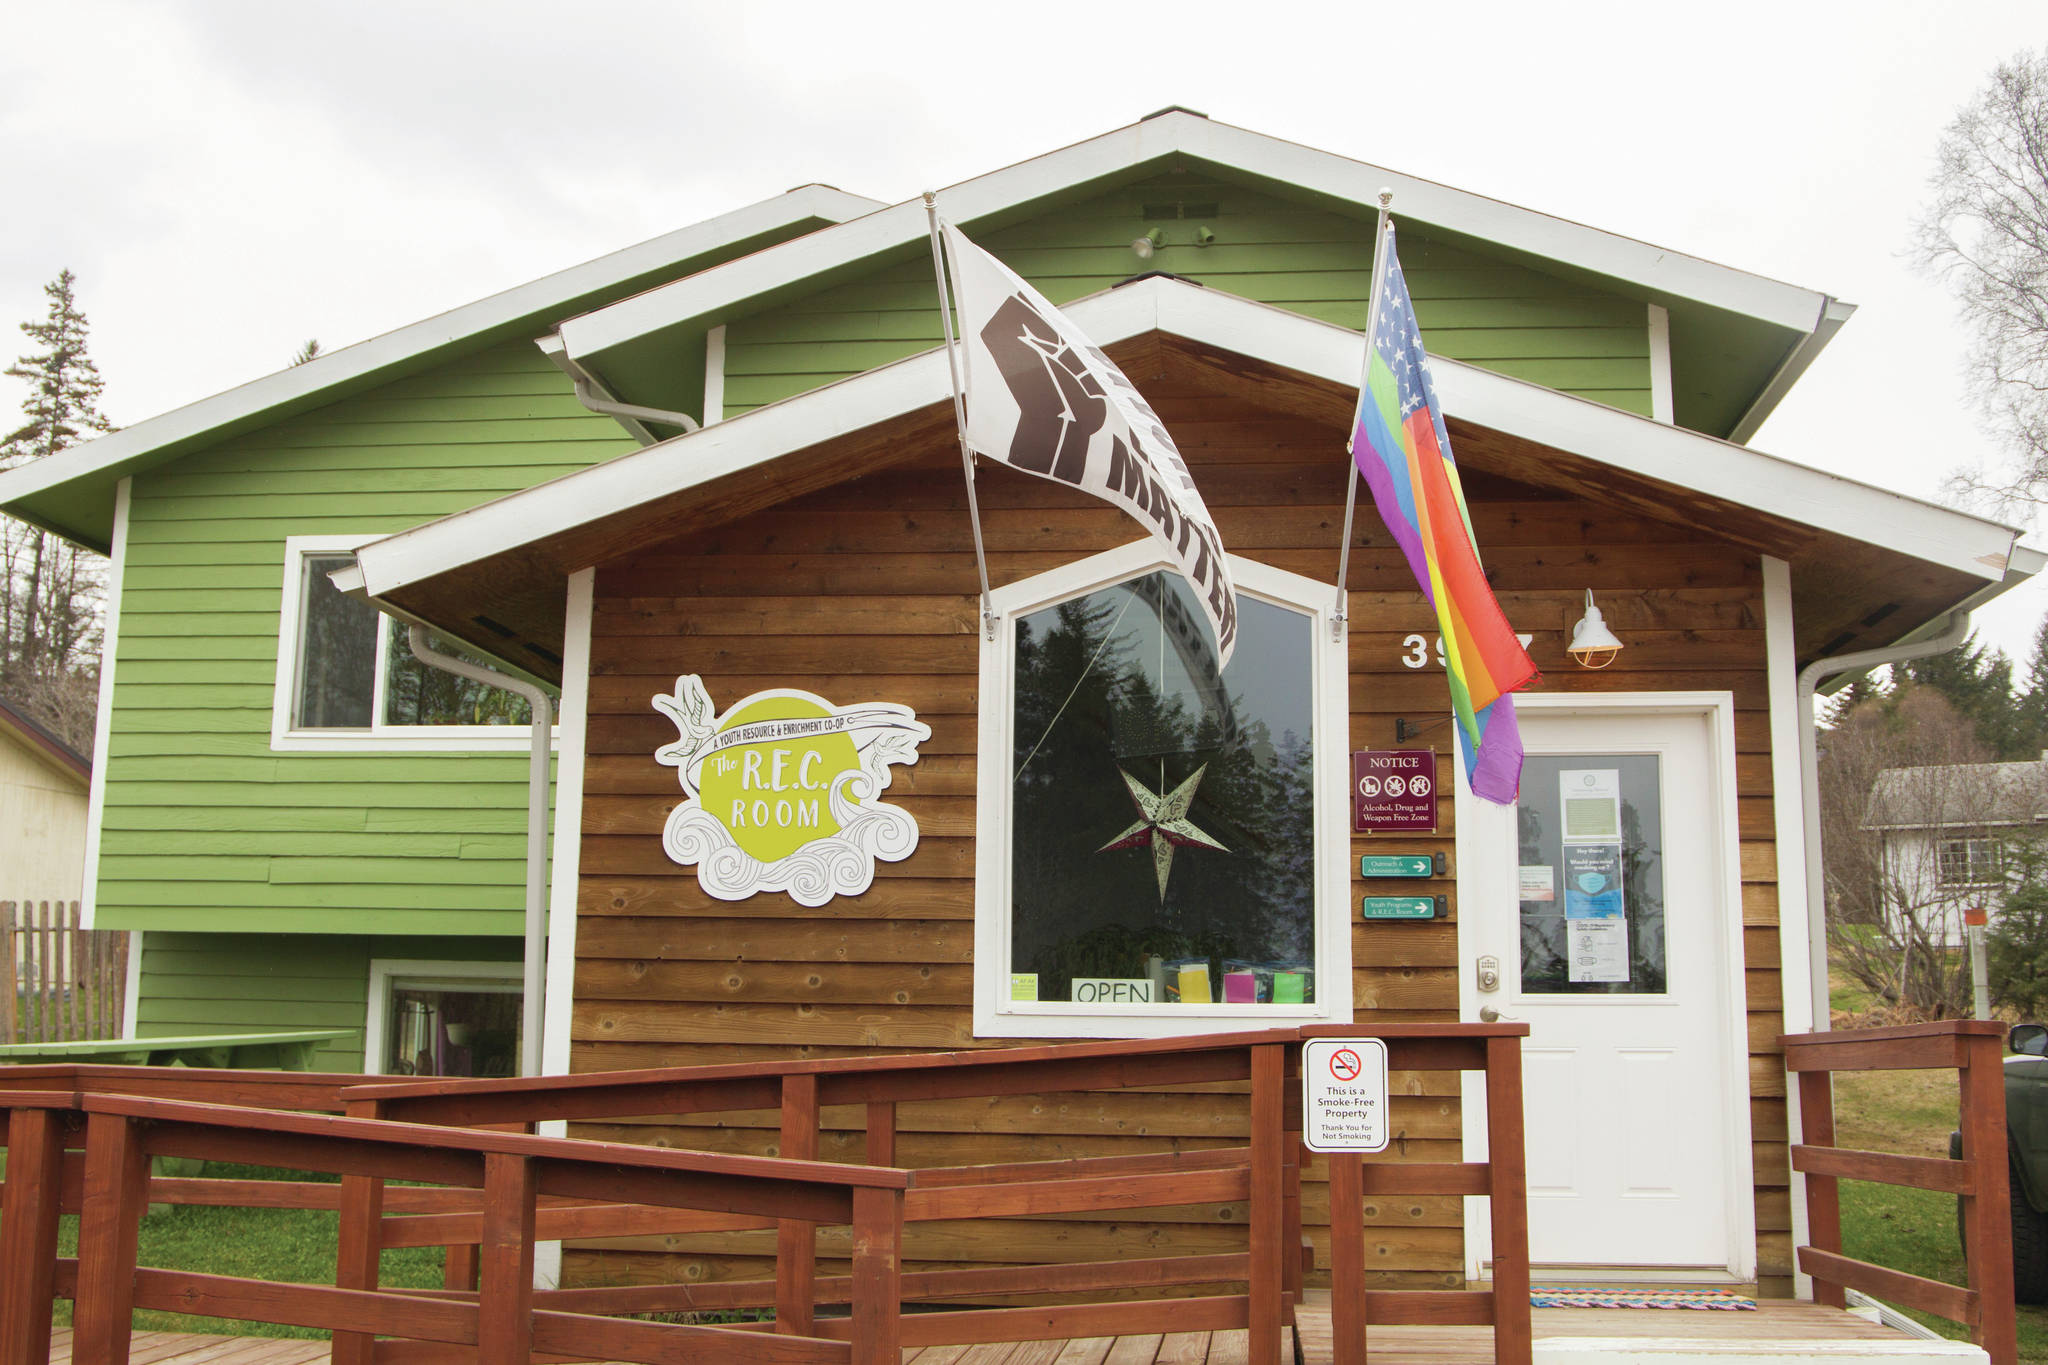 The REC Room, youth Resource and Enrichment Co-op, was established in 2010 by the Kachemak Bay Family Planning Clinic to offer a safe and empowering space for youth ages 12-18 to gather after school.